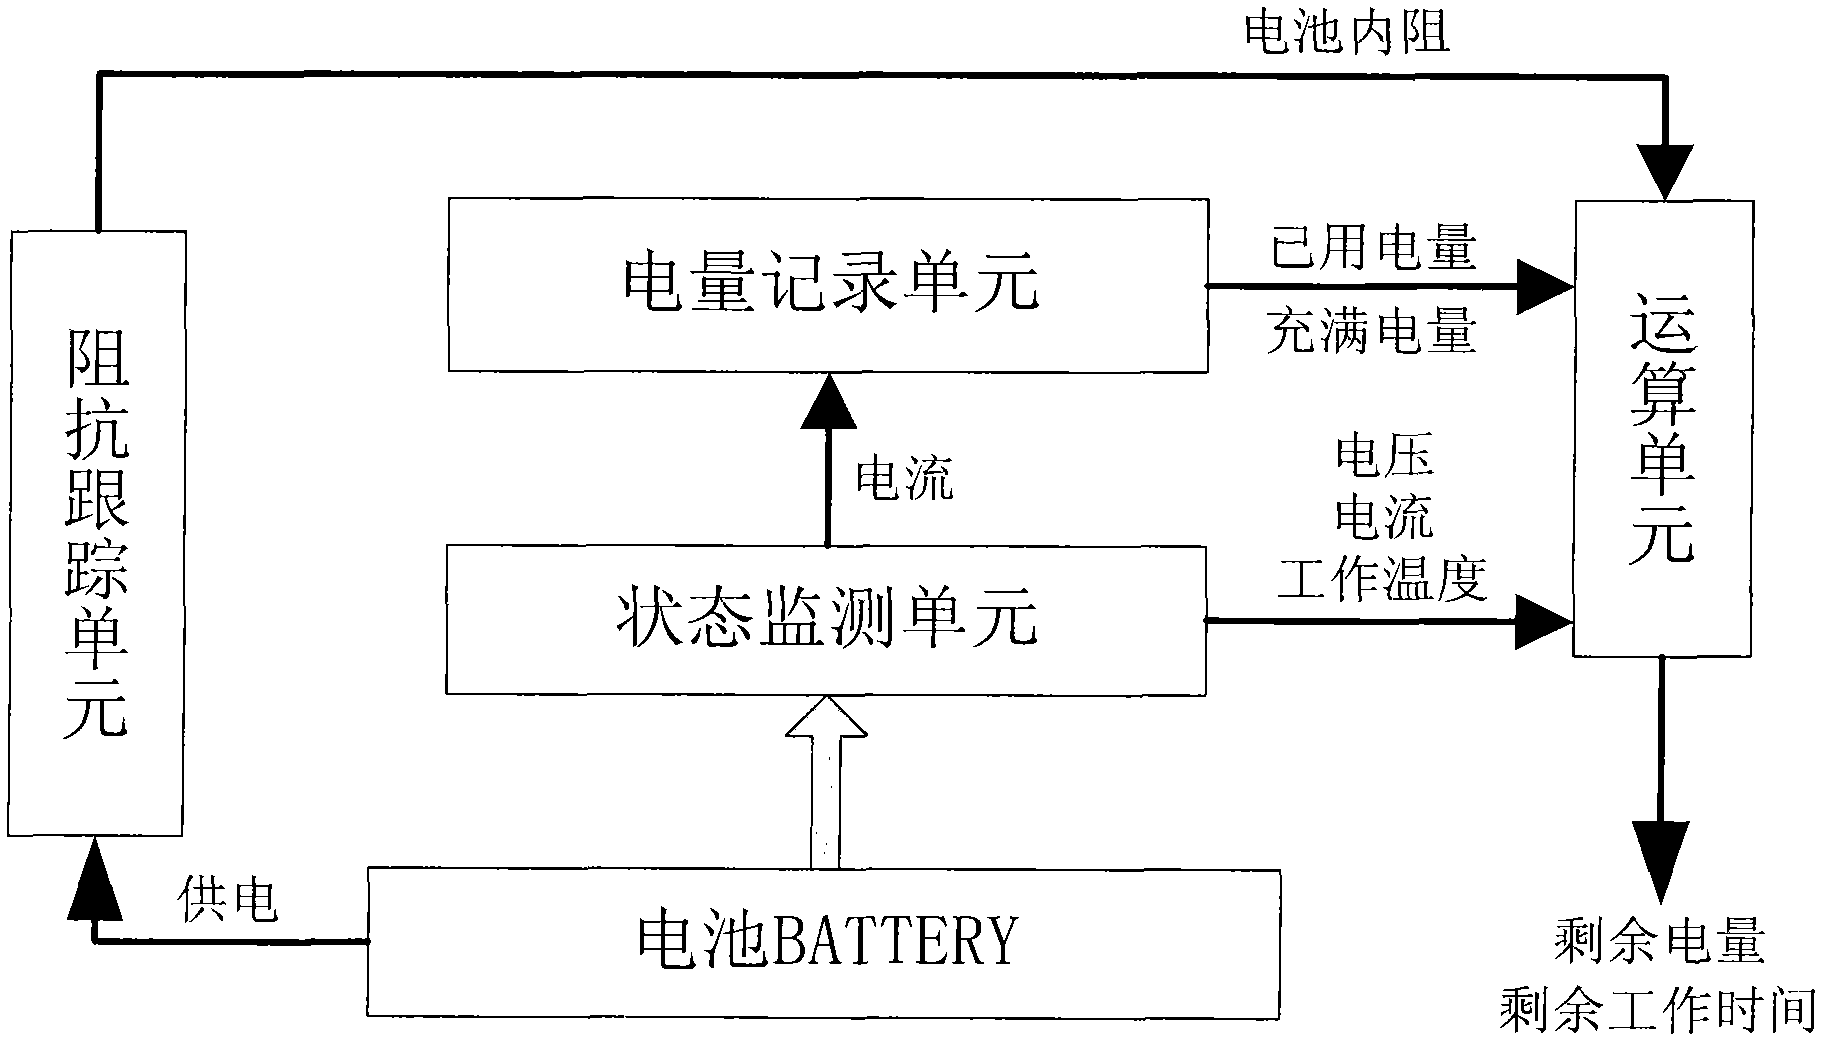 Monitoring system for electric quantity of lithium battery